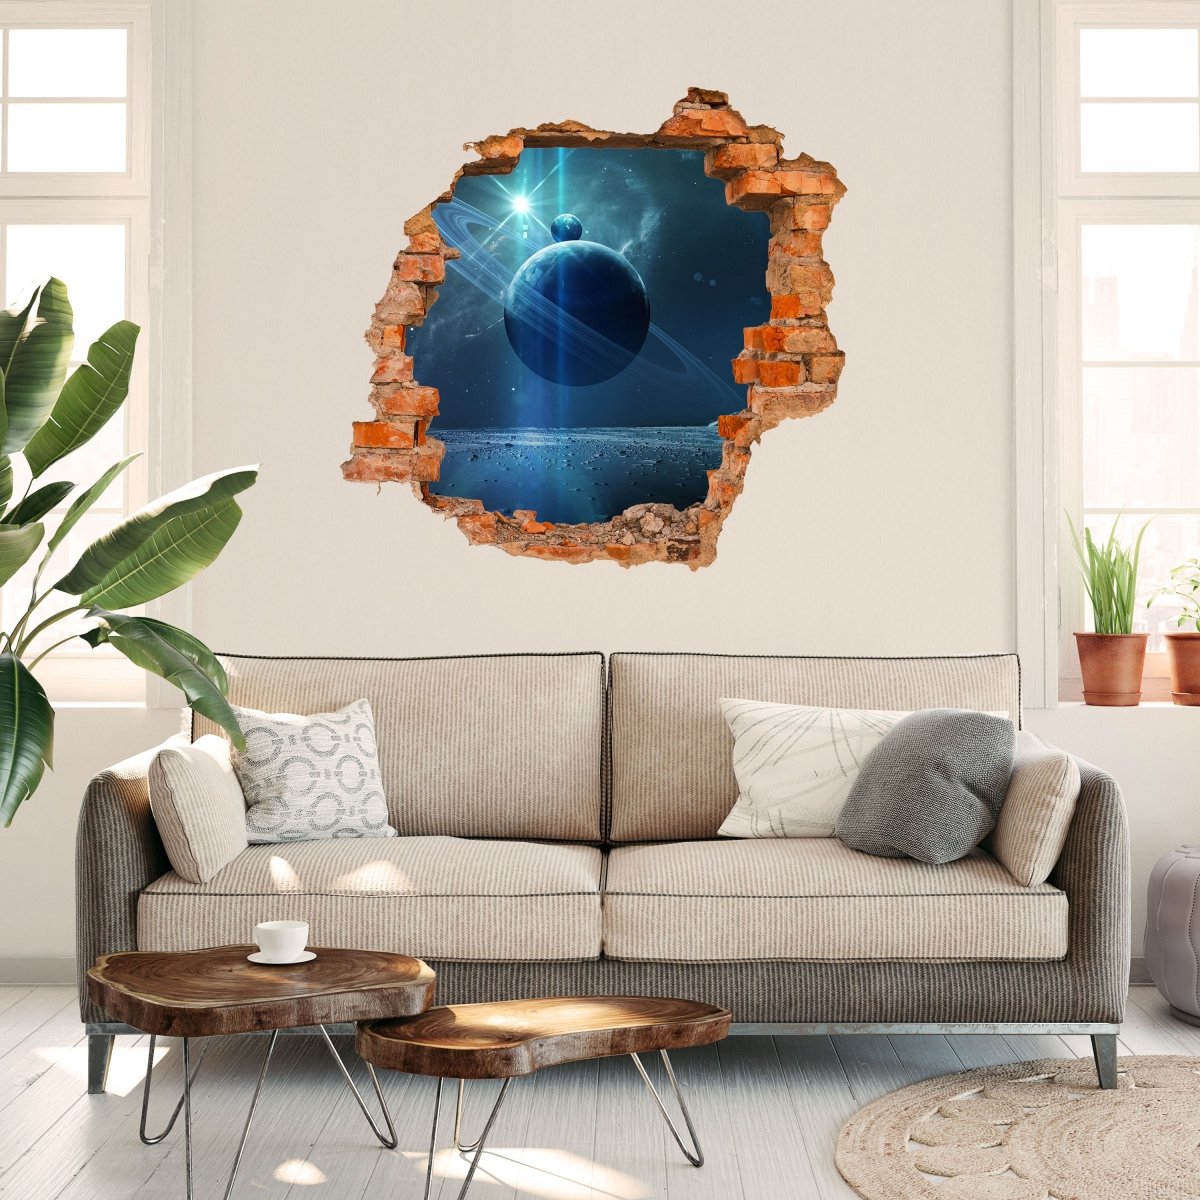 3D wall sticker planets in the solar system, outer space - wall decal M1071